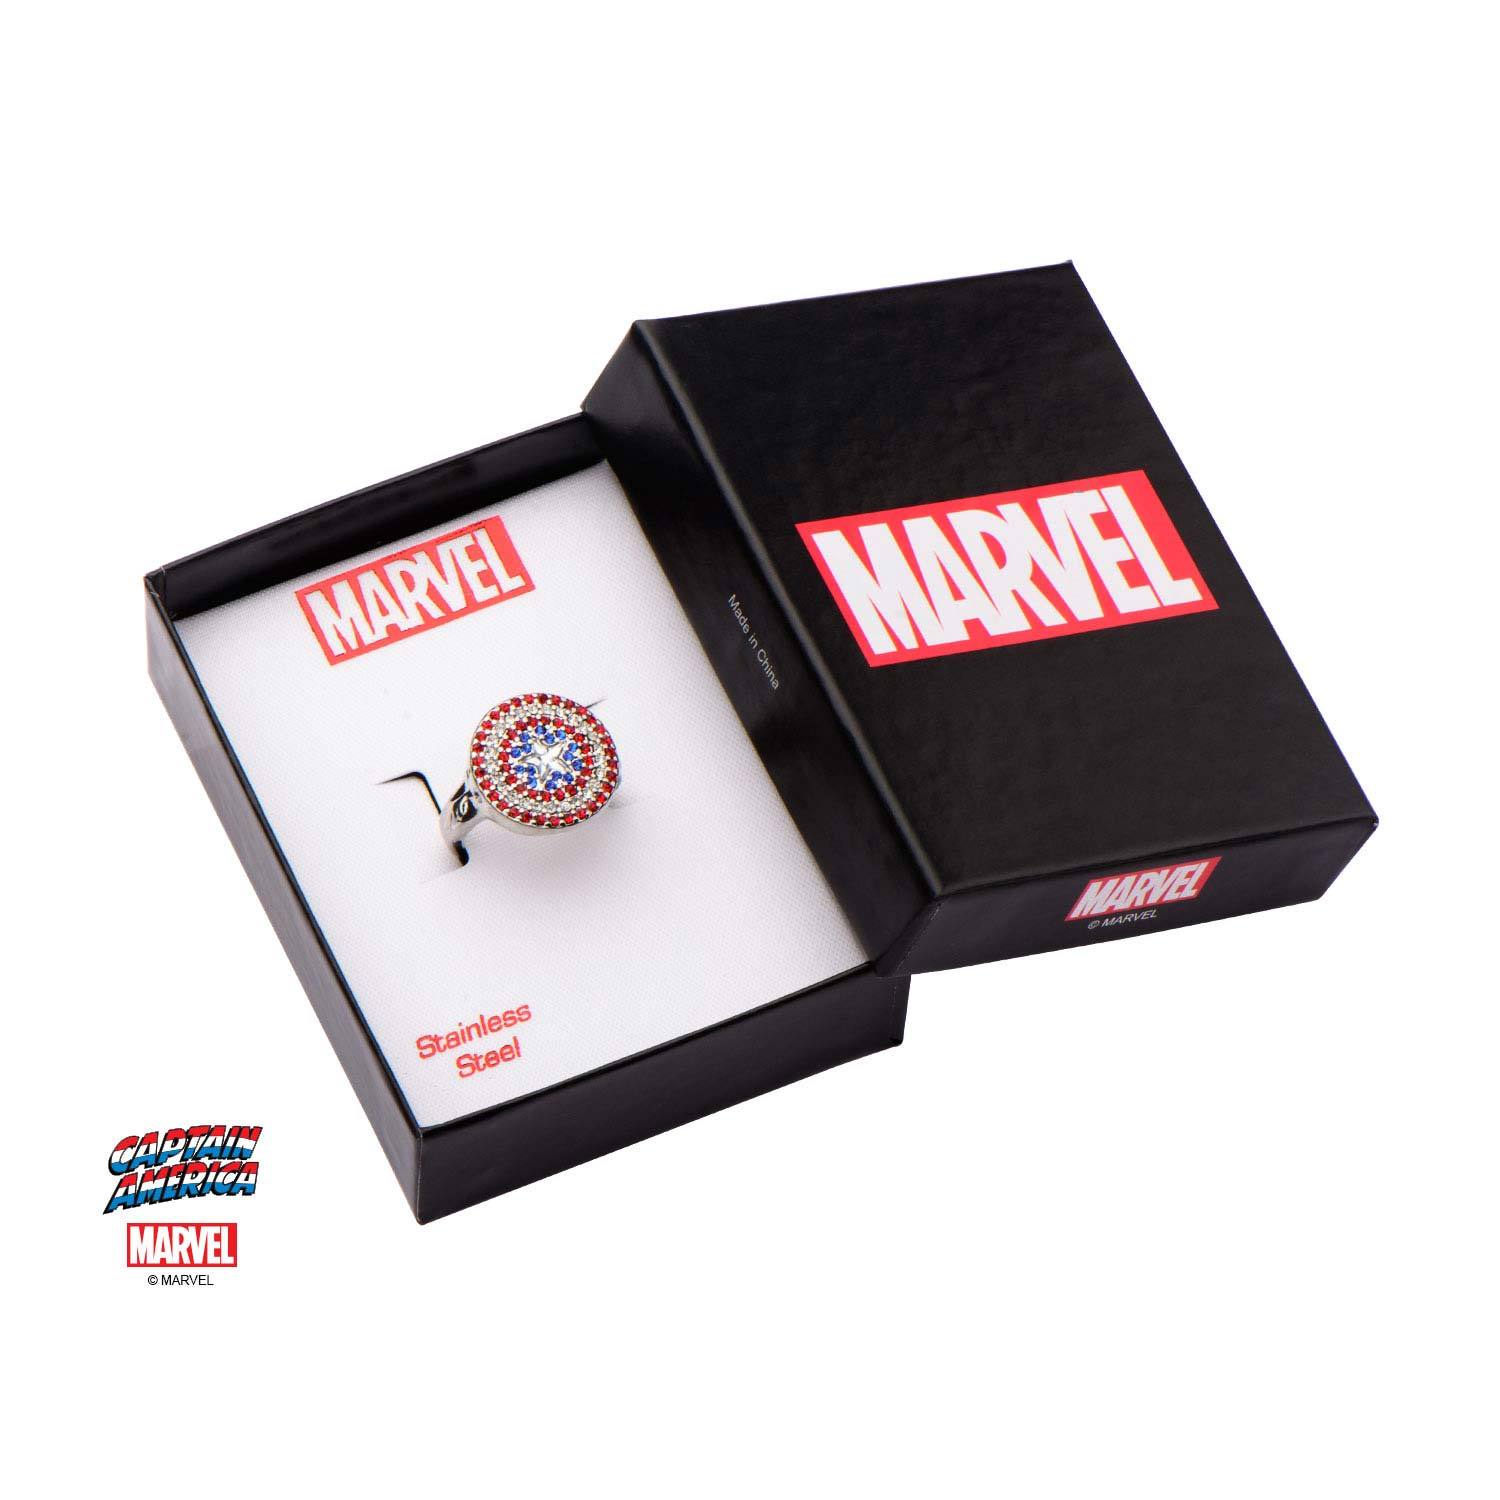 Marvel's Captain America Shield Logo Ring with Red, White, and Blue Bling